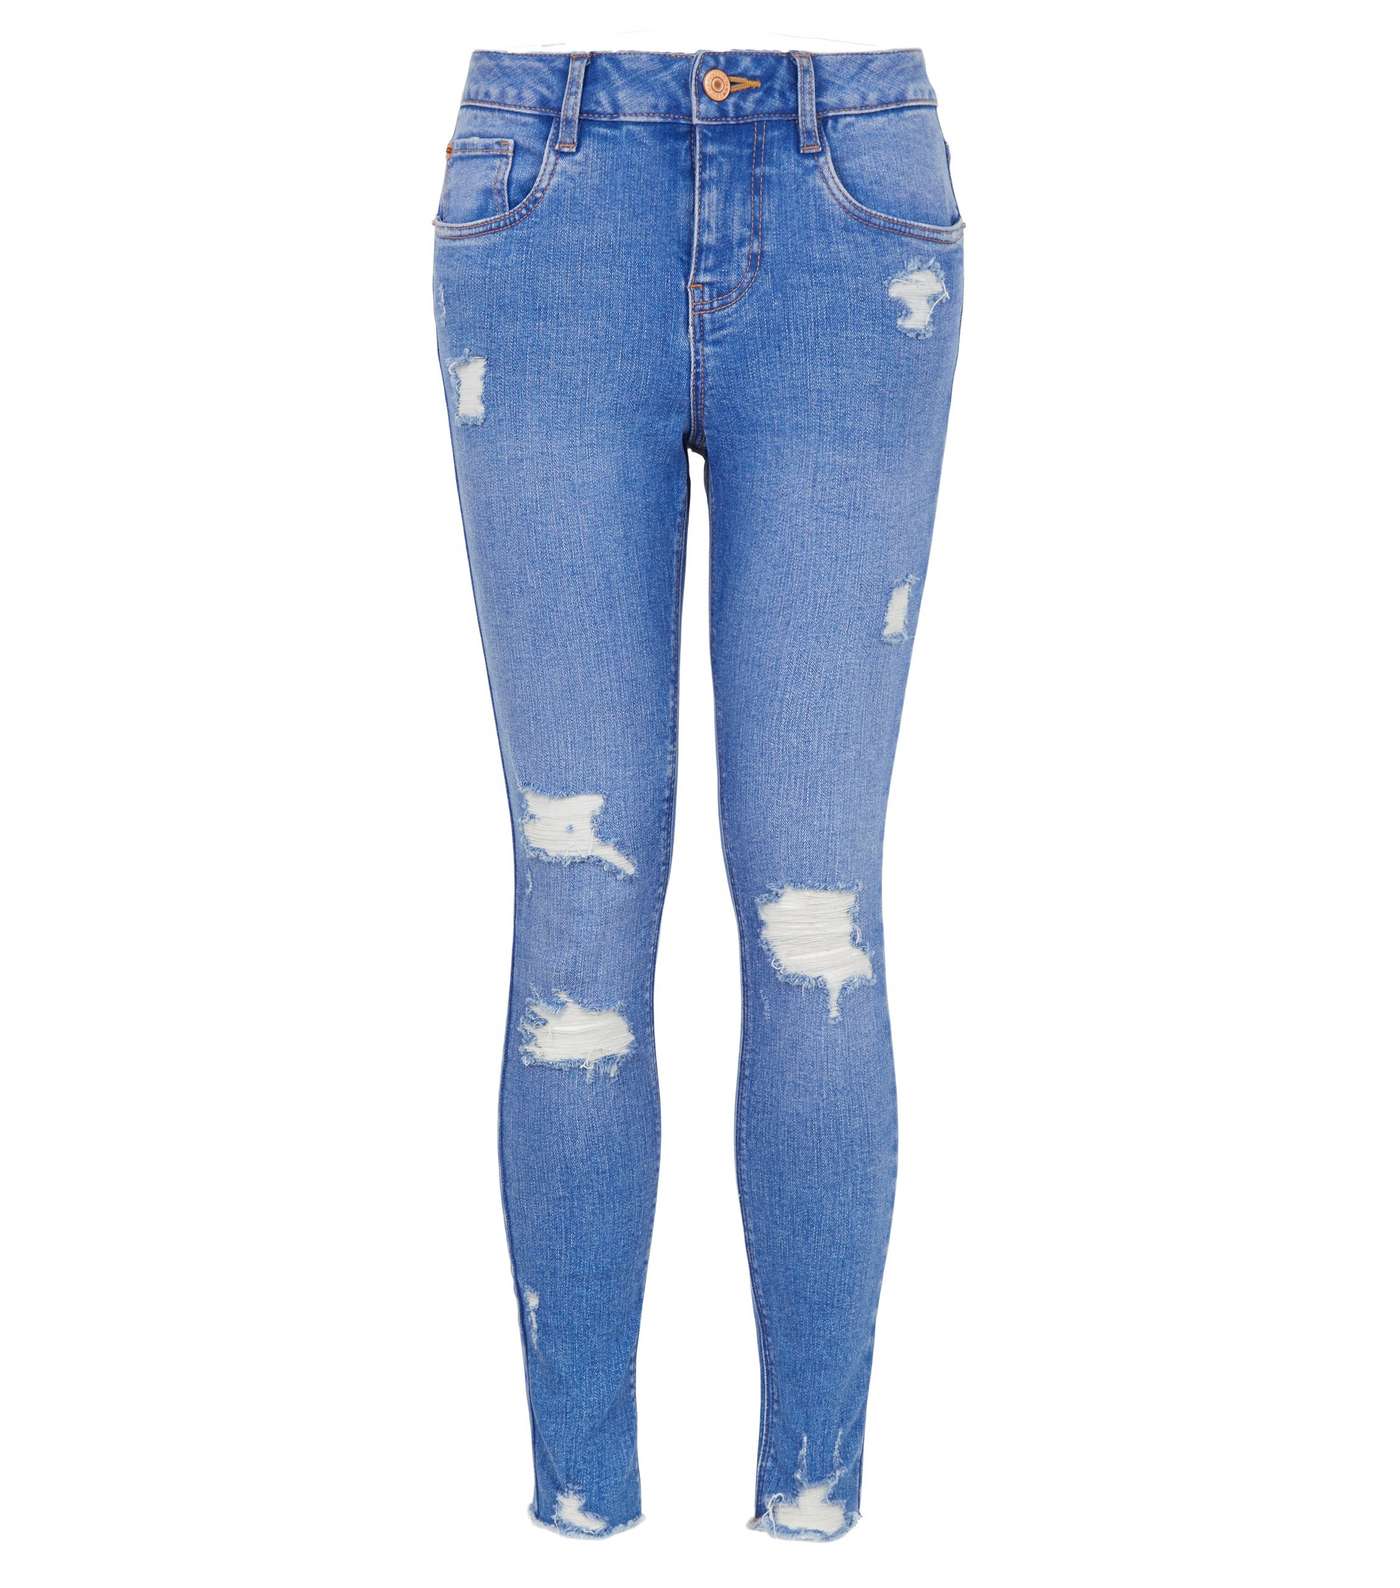 Girls Bright Blue Ripped Skinny Jeans Image 4